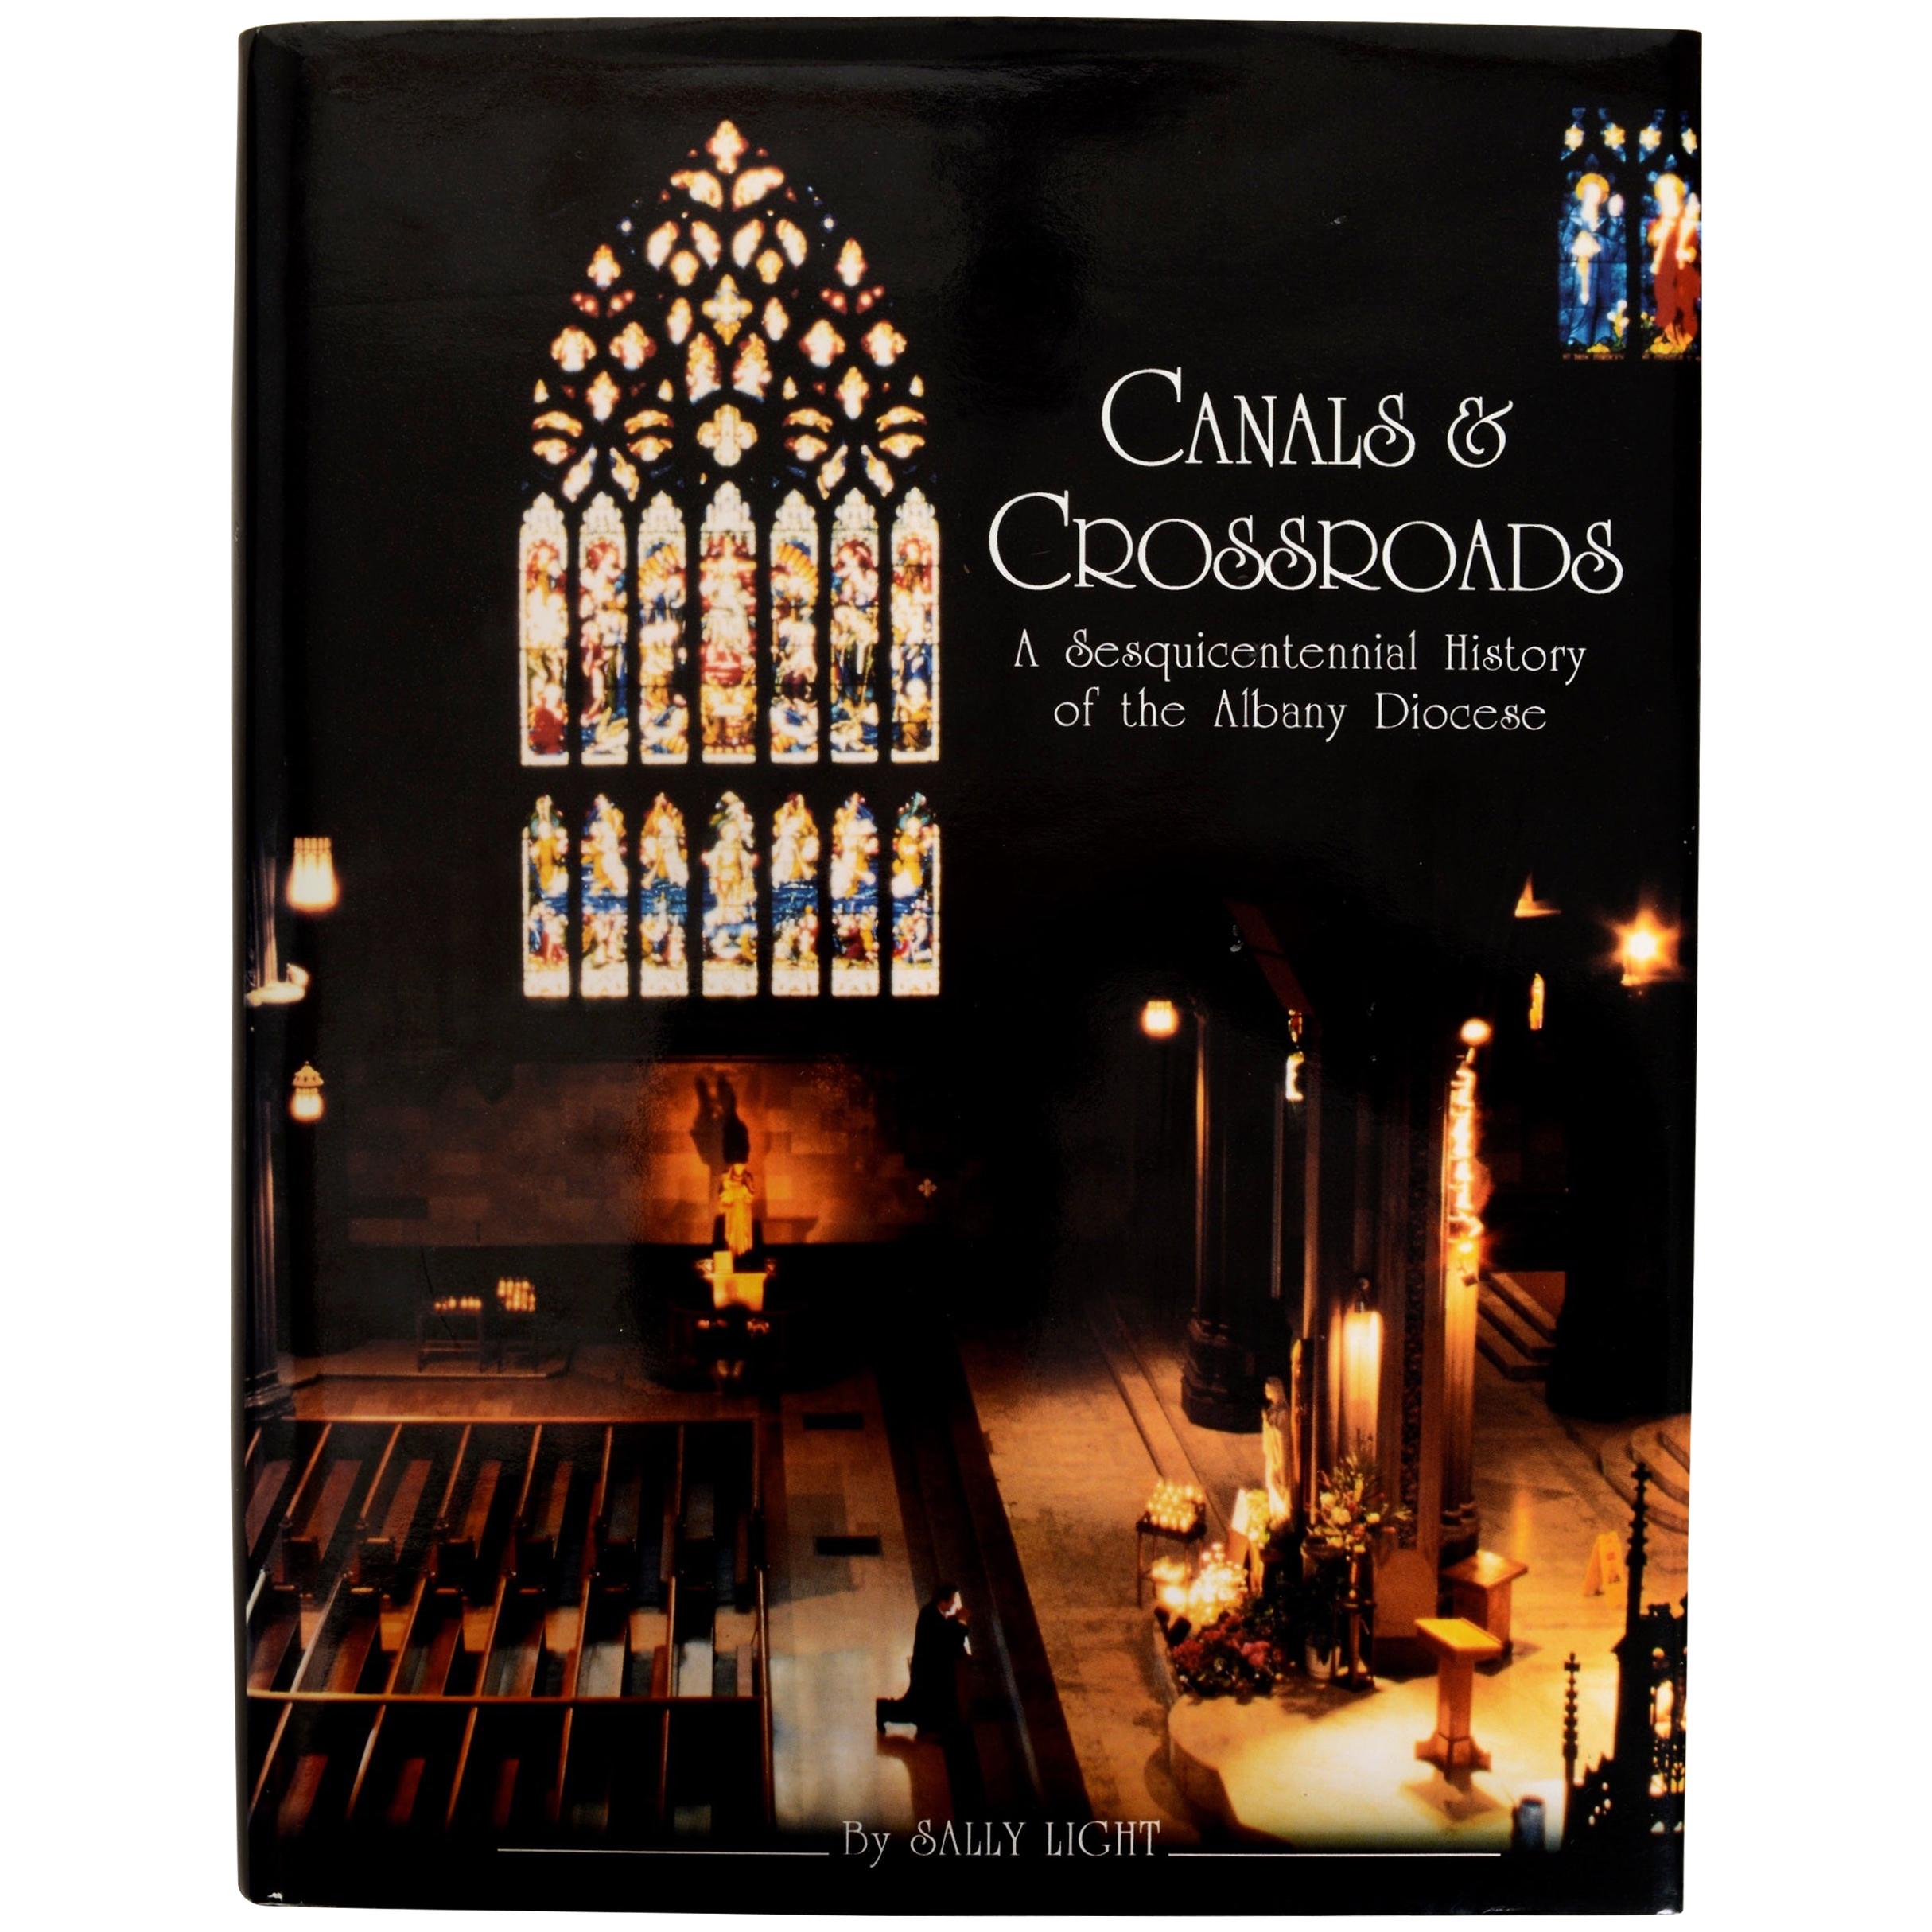 Canals & Crossroads An illustrated History of Albany, NY Roman Catholic Diocese